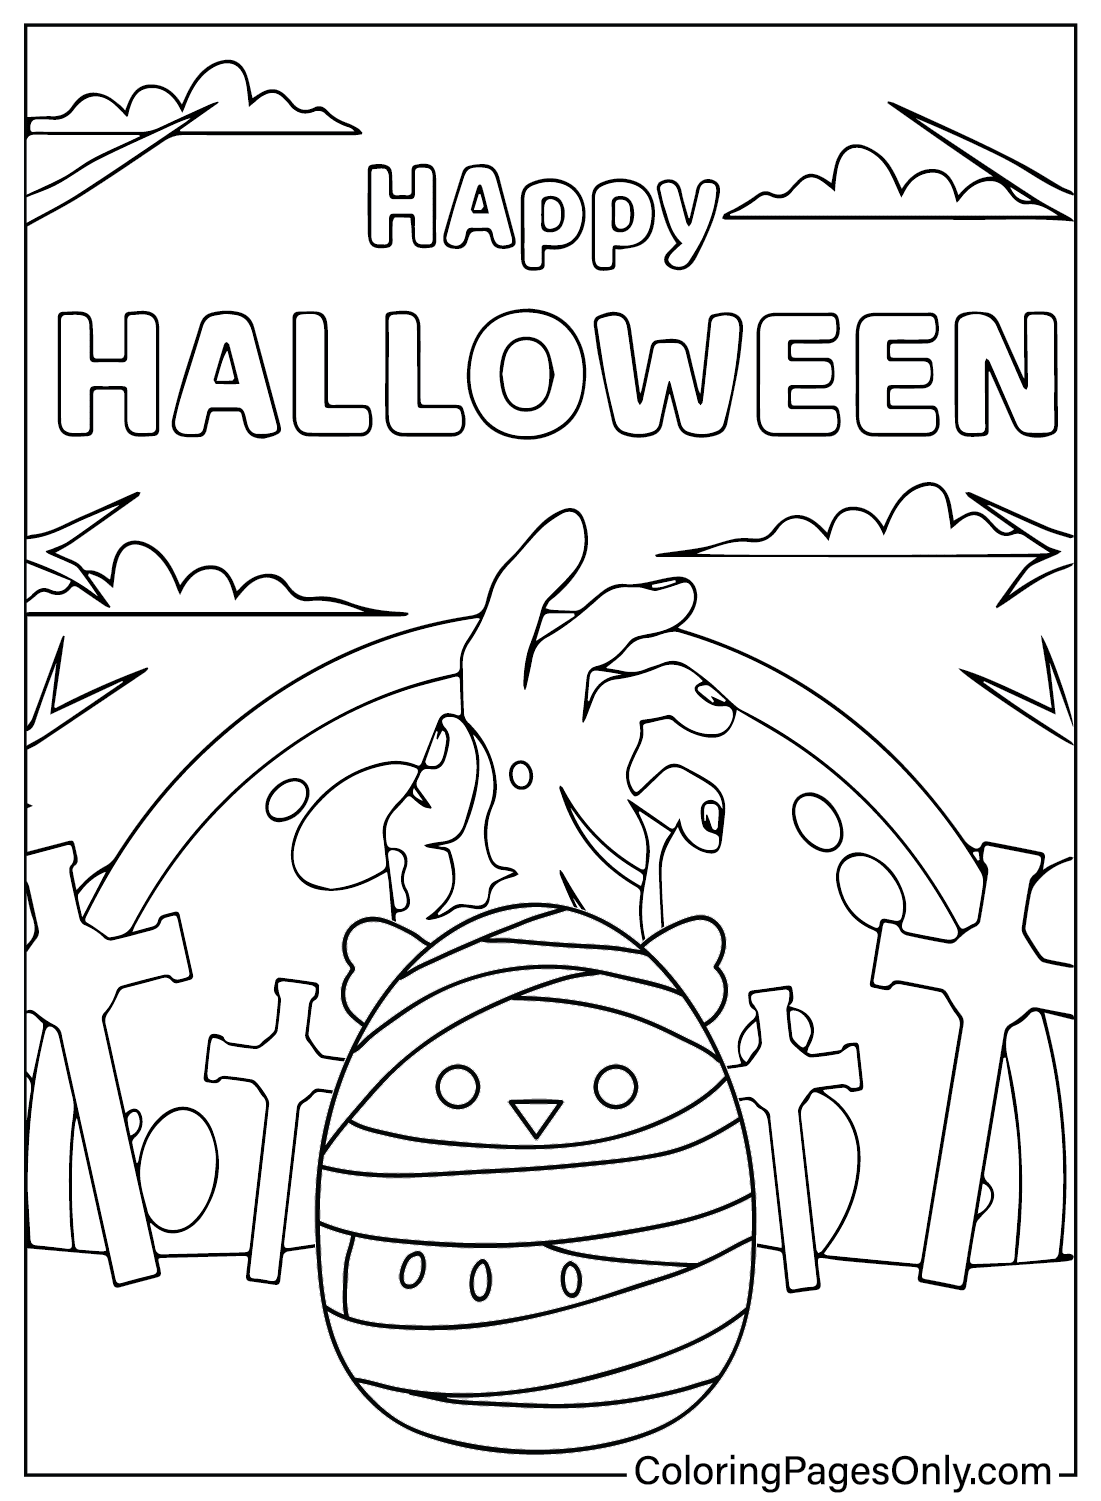 Mummy Squishmallow Coloring Page from Squishmallow Halloween